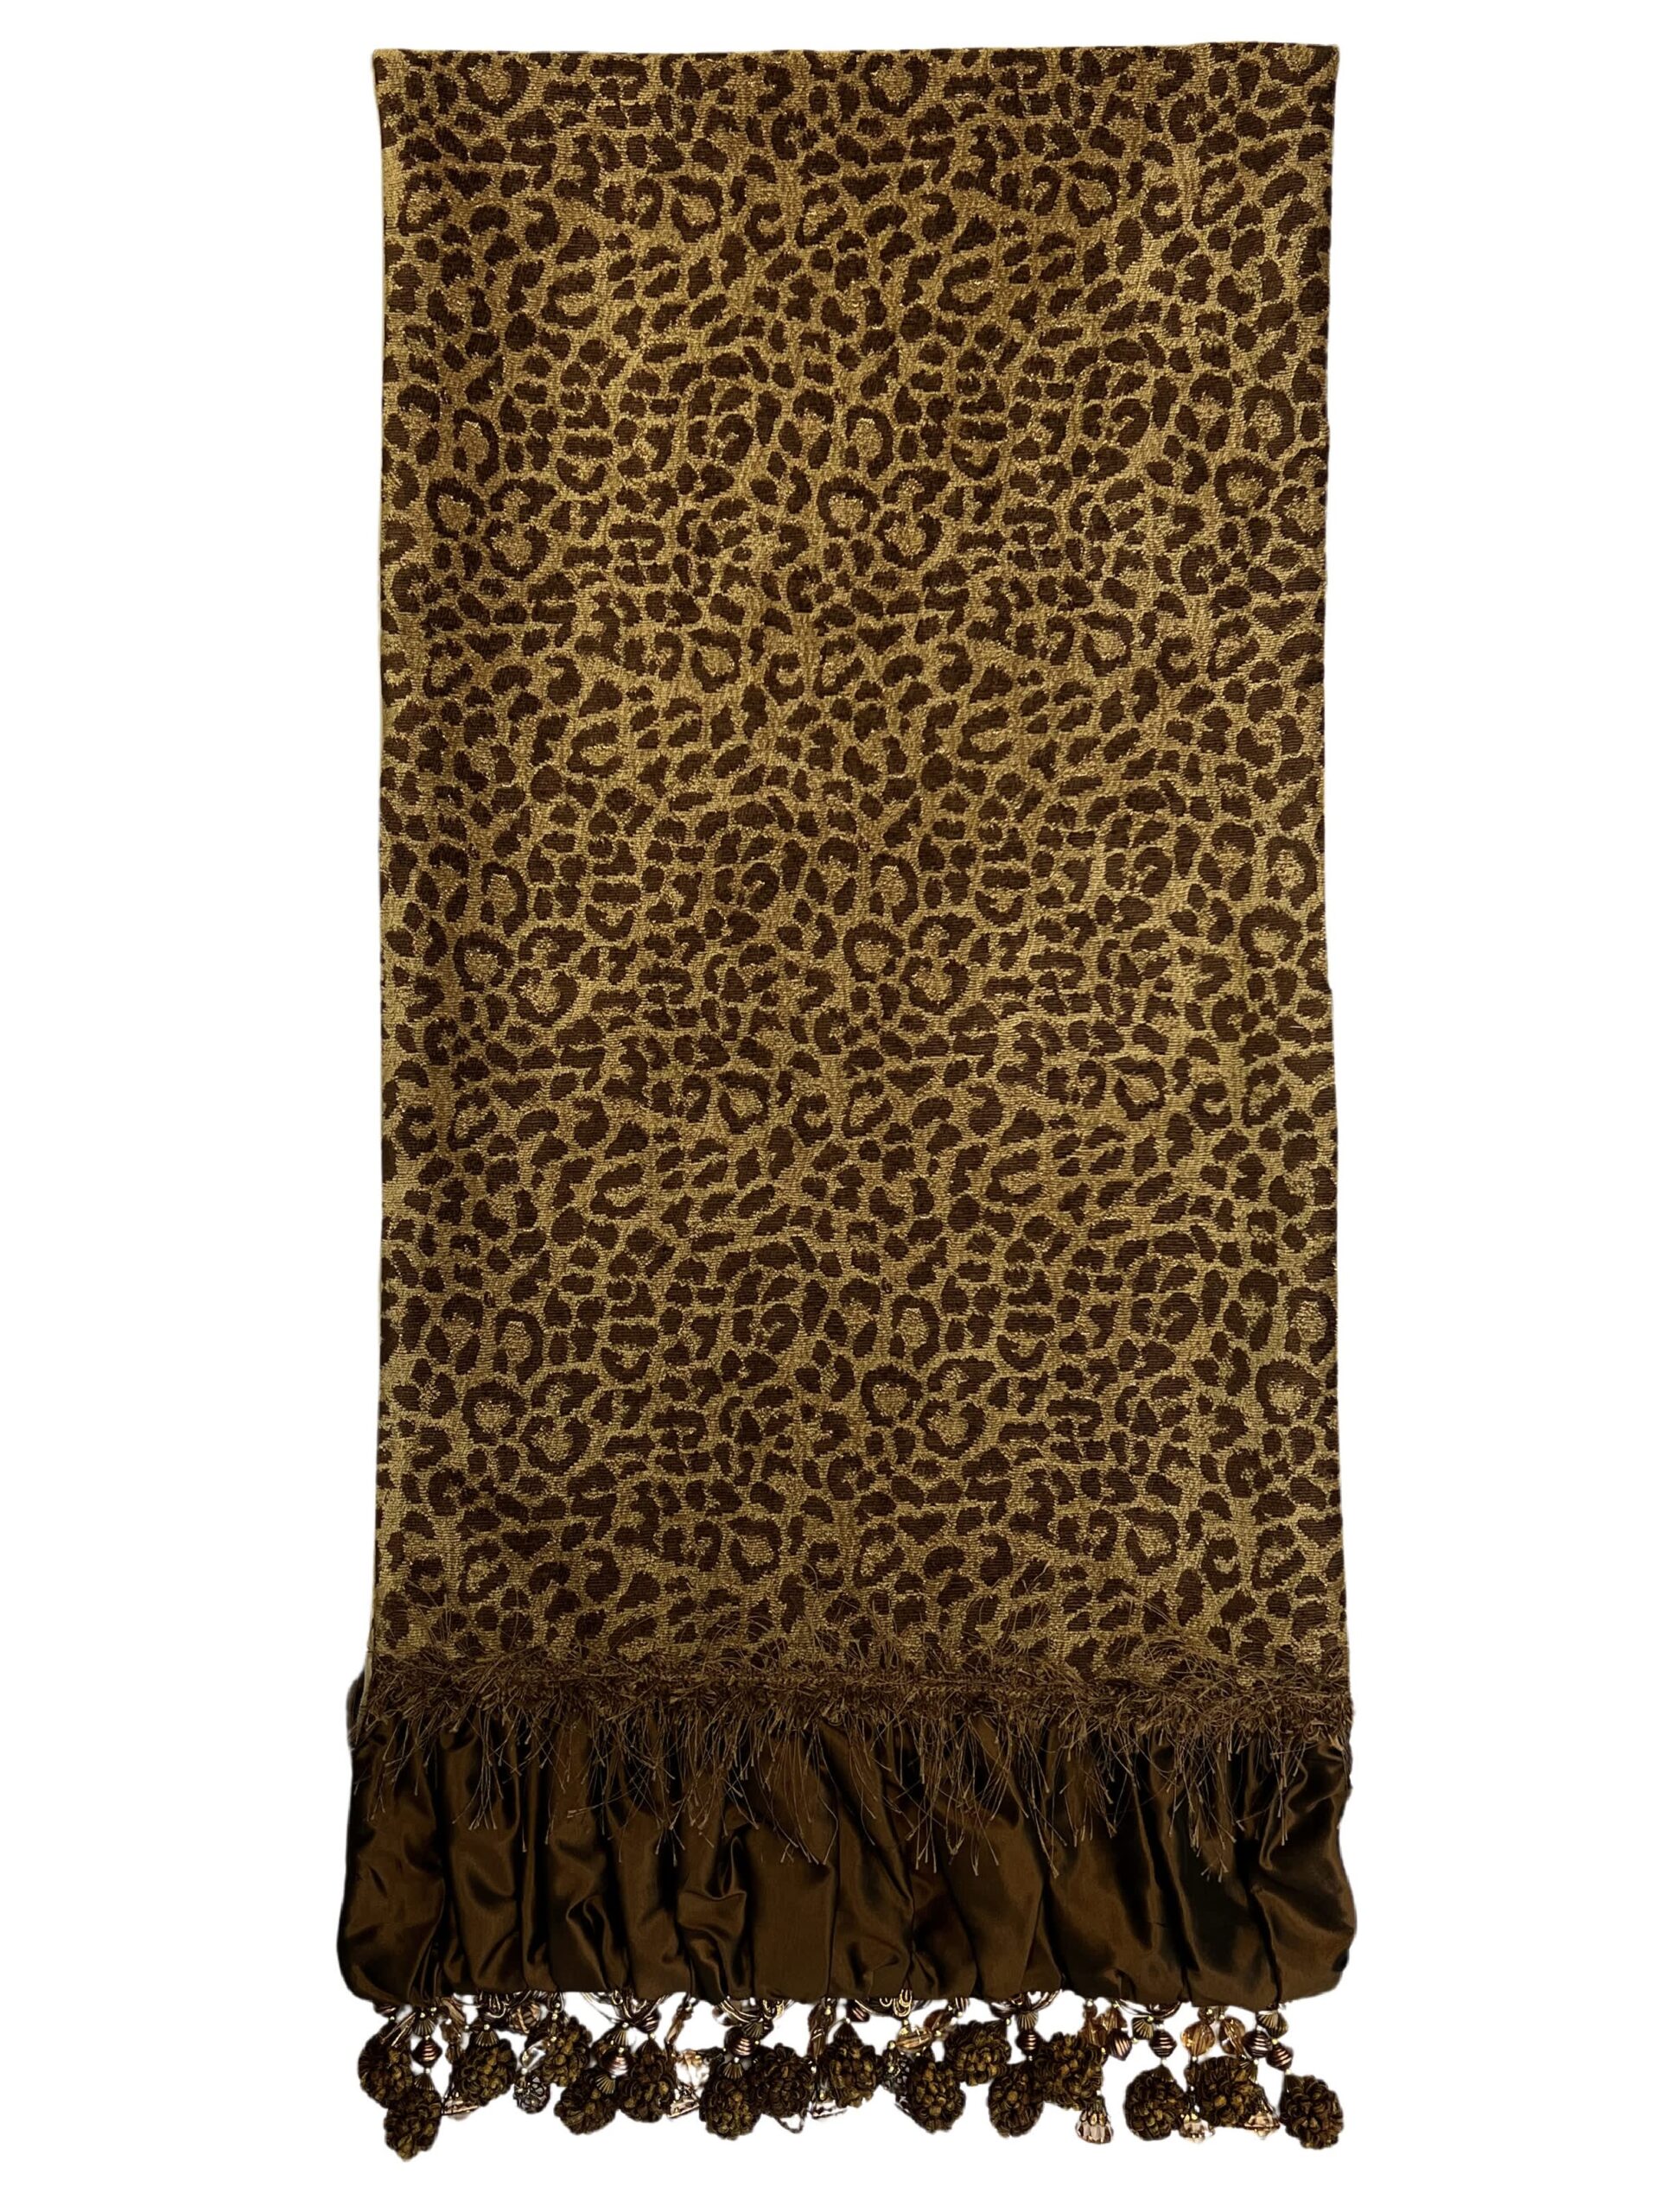 Chocolate Brown Leopard Table Runner - Luxuria